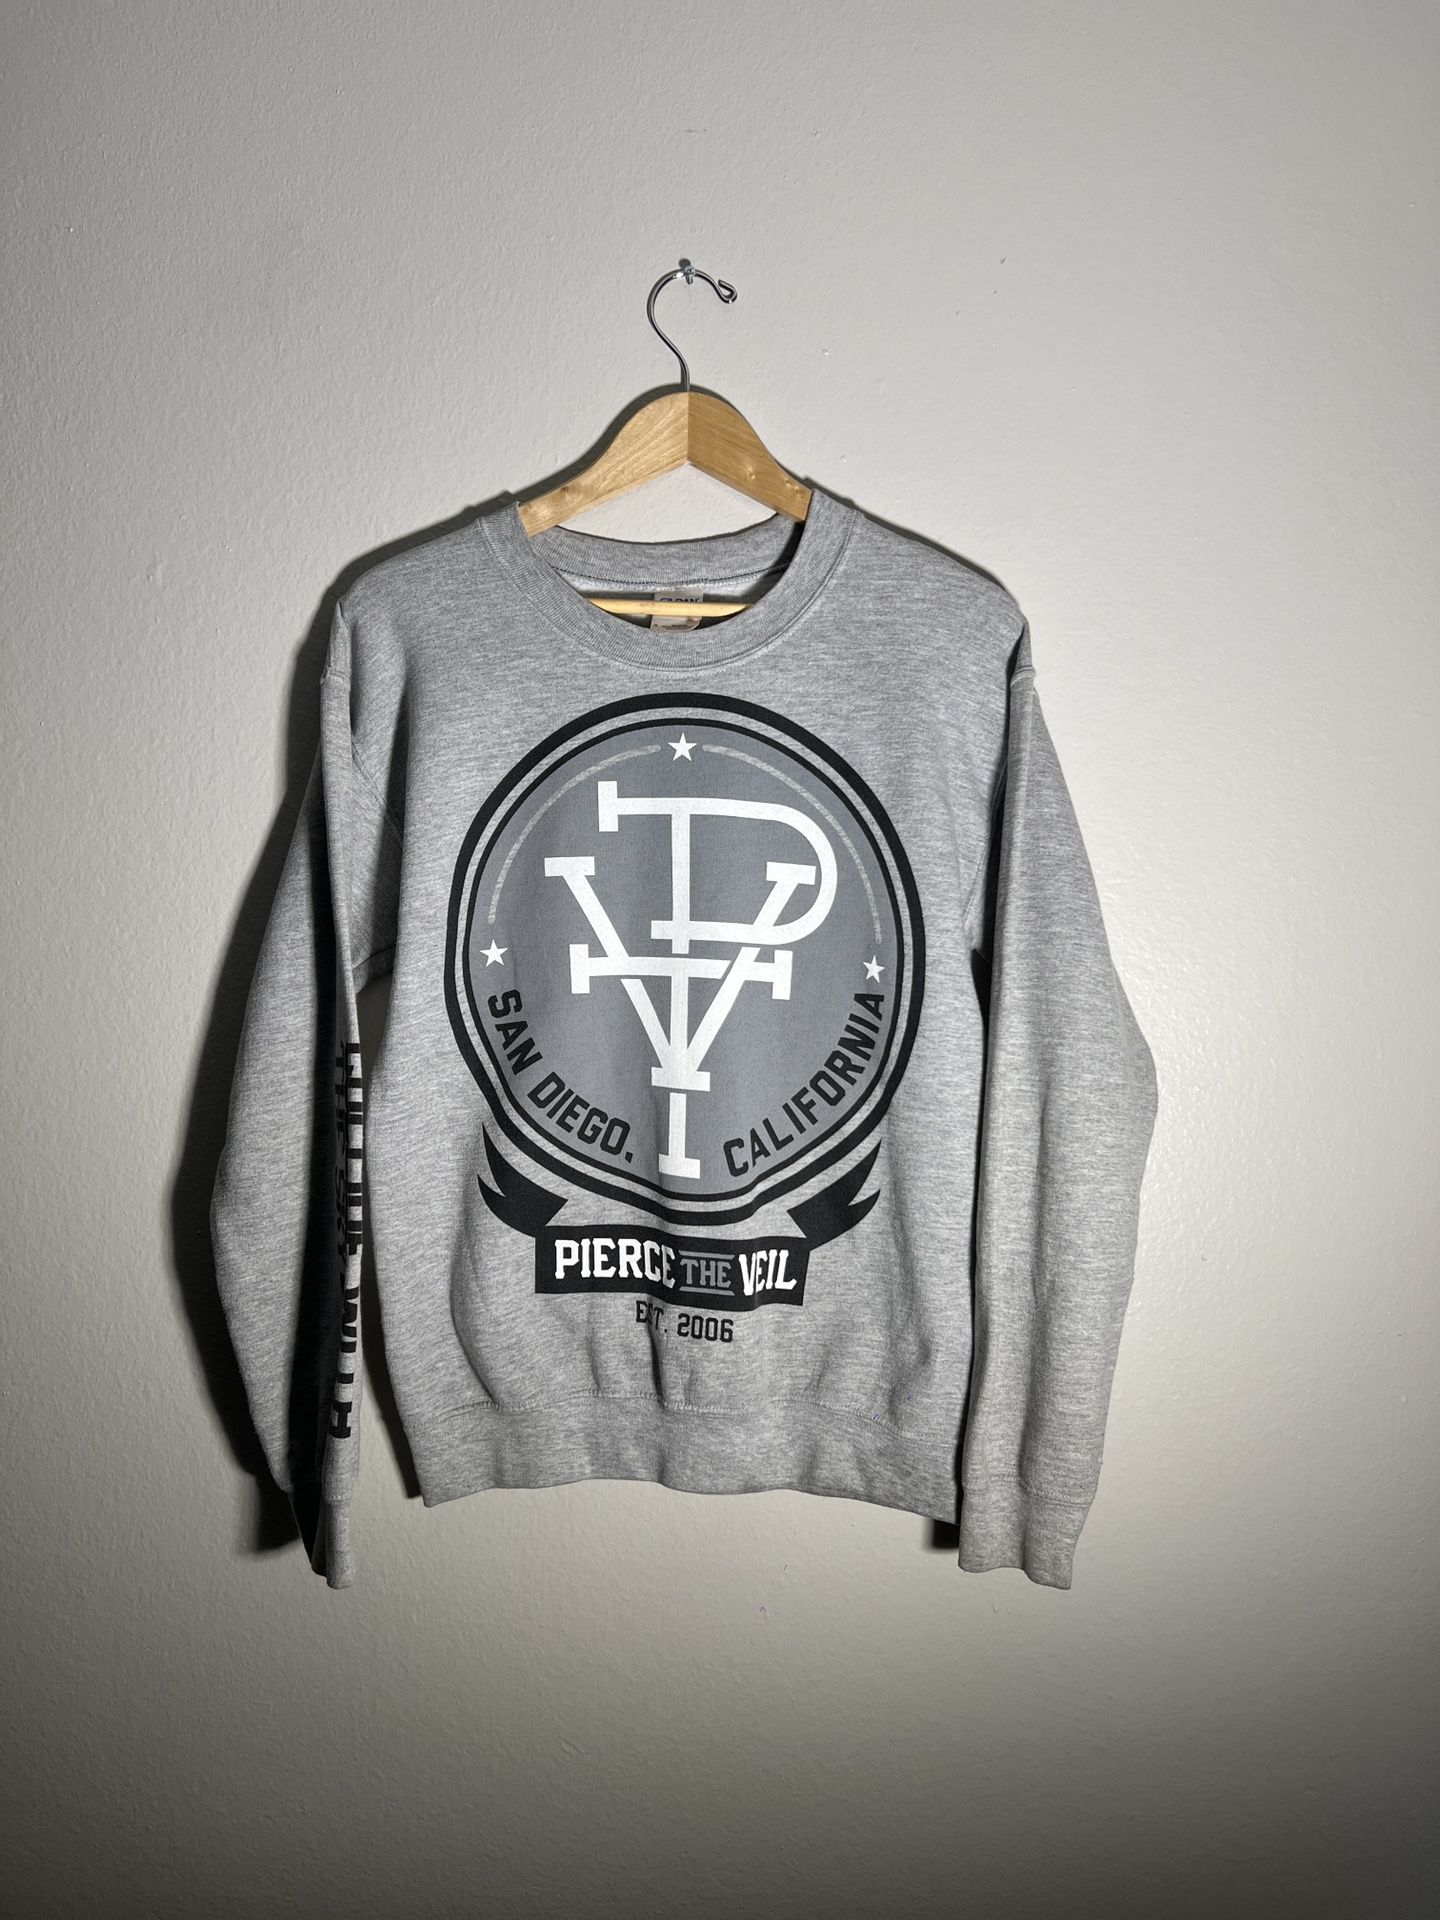 Pierce The Veil - Collide With The Sky Size Small Crew Neck 2012 Sweater Rare